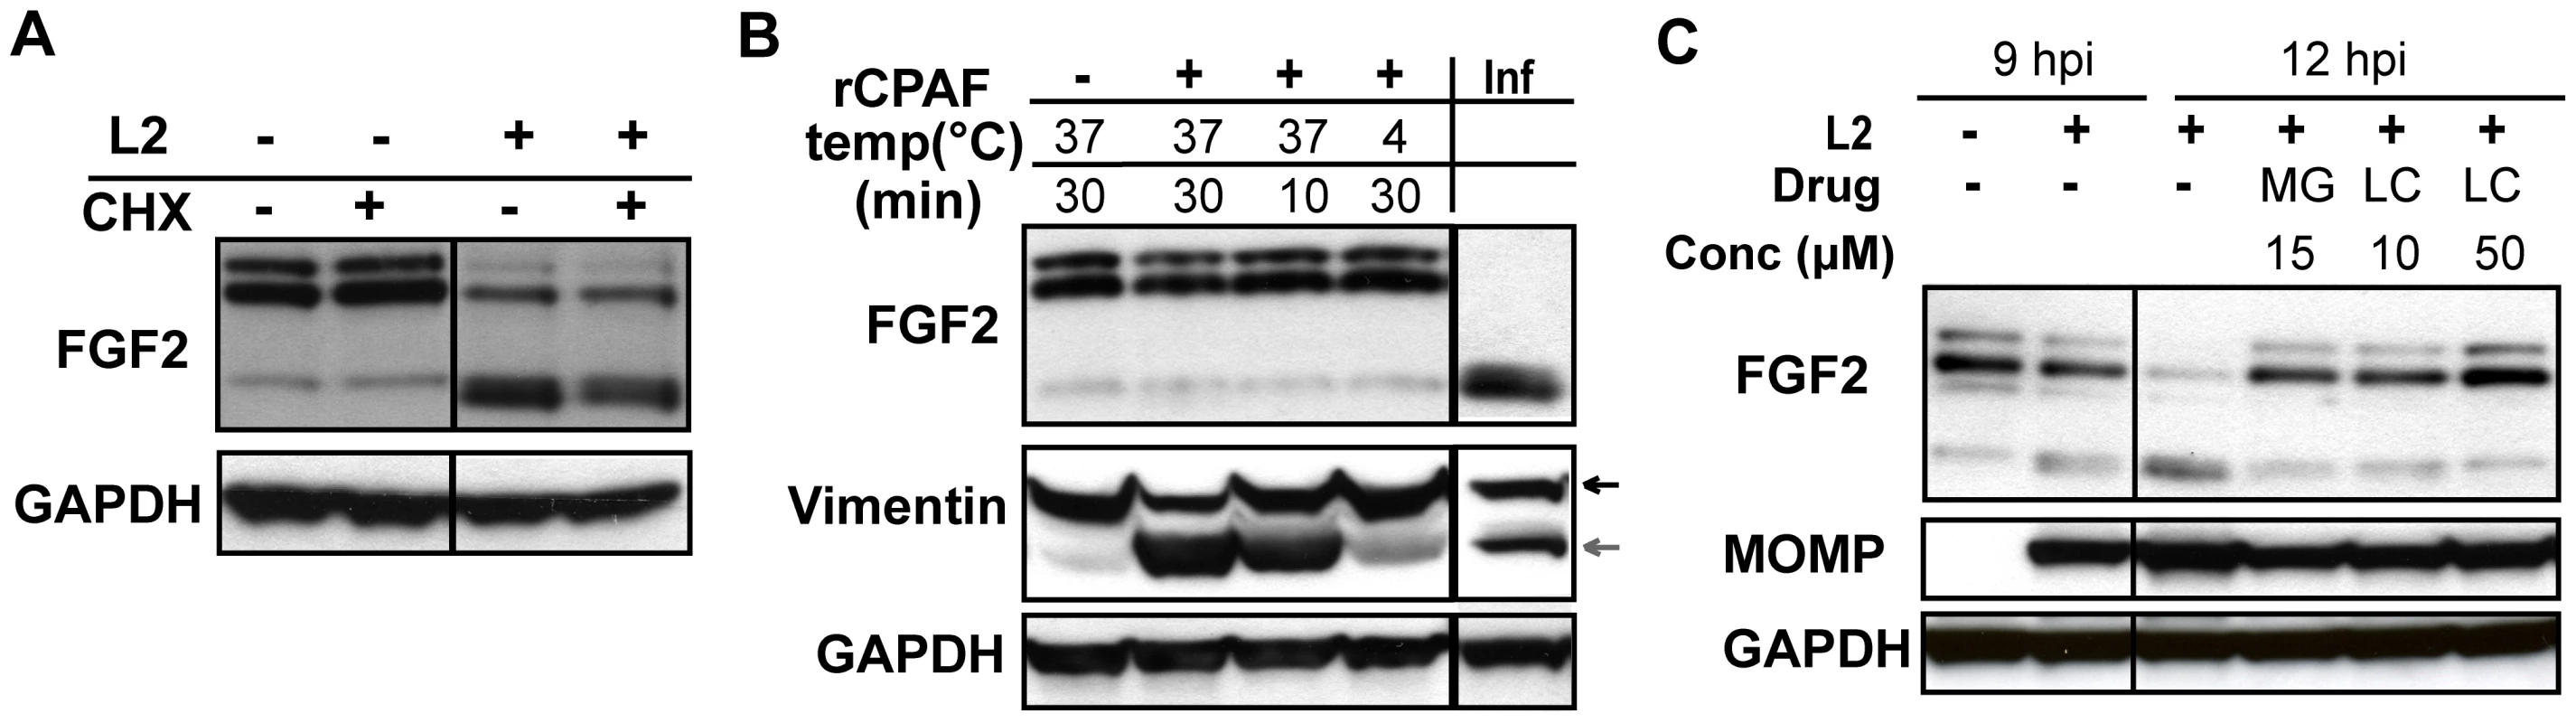 HMW FGF2 isoforms are degraded by <i>C. trachomatis</i> L2-induced host proteases.